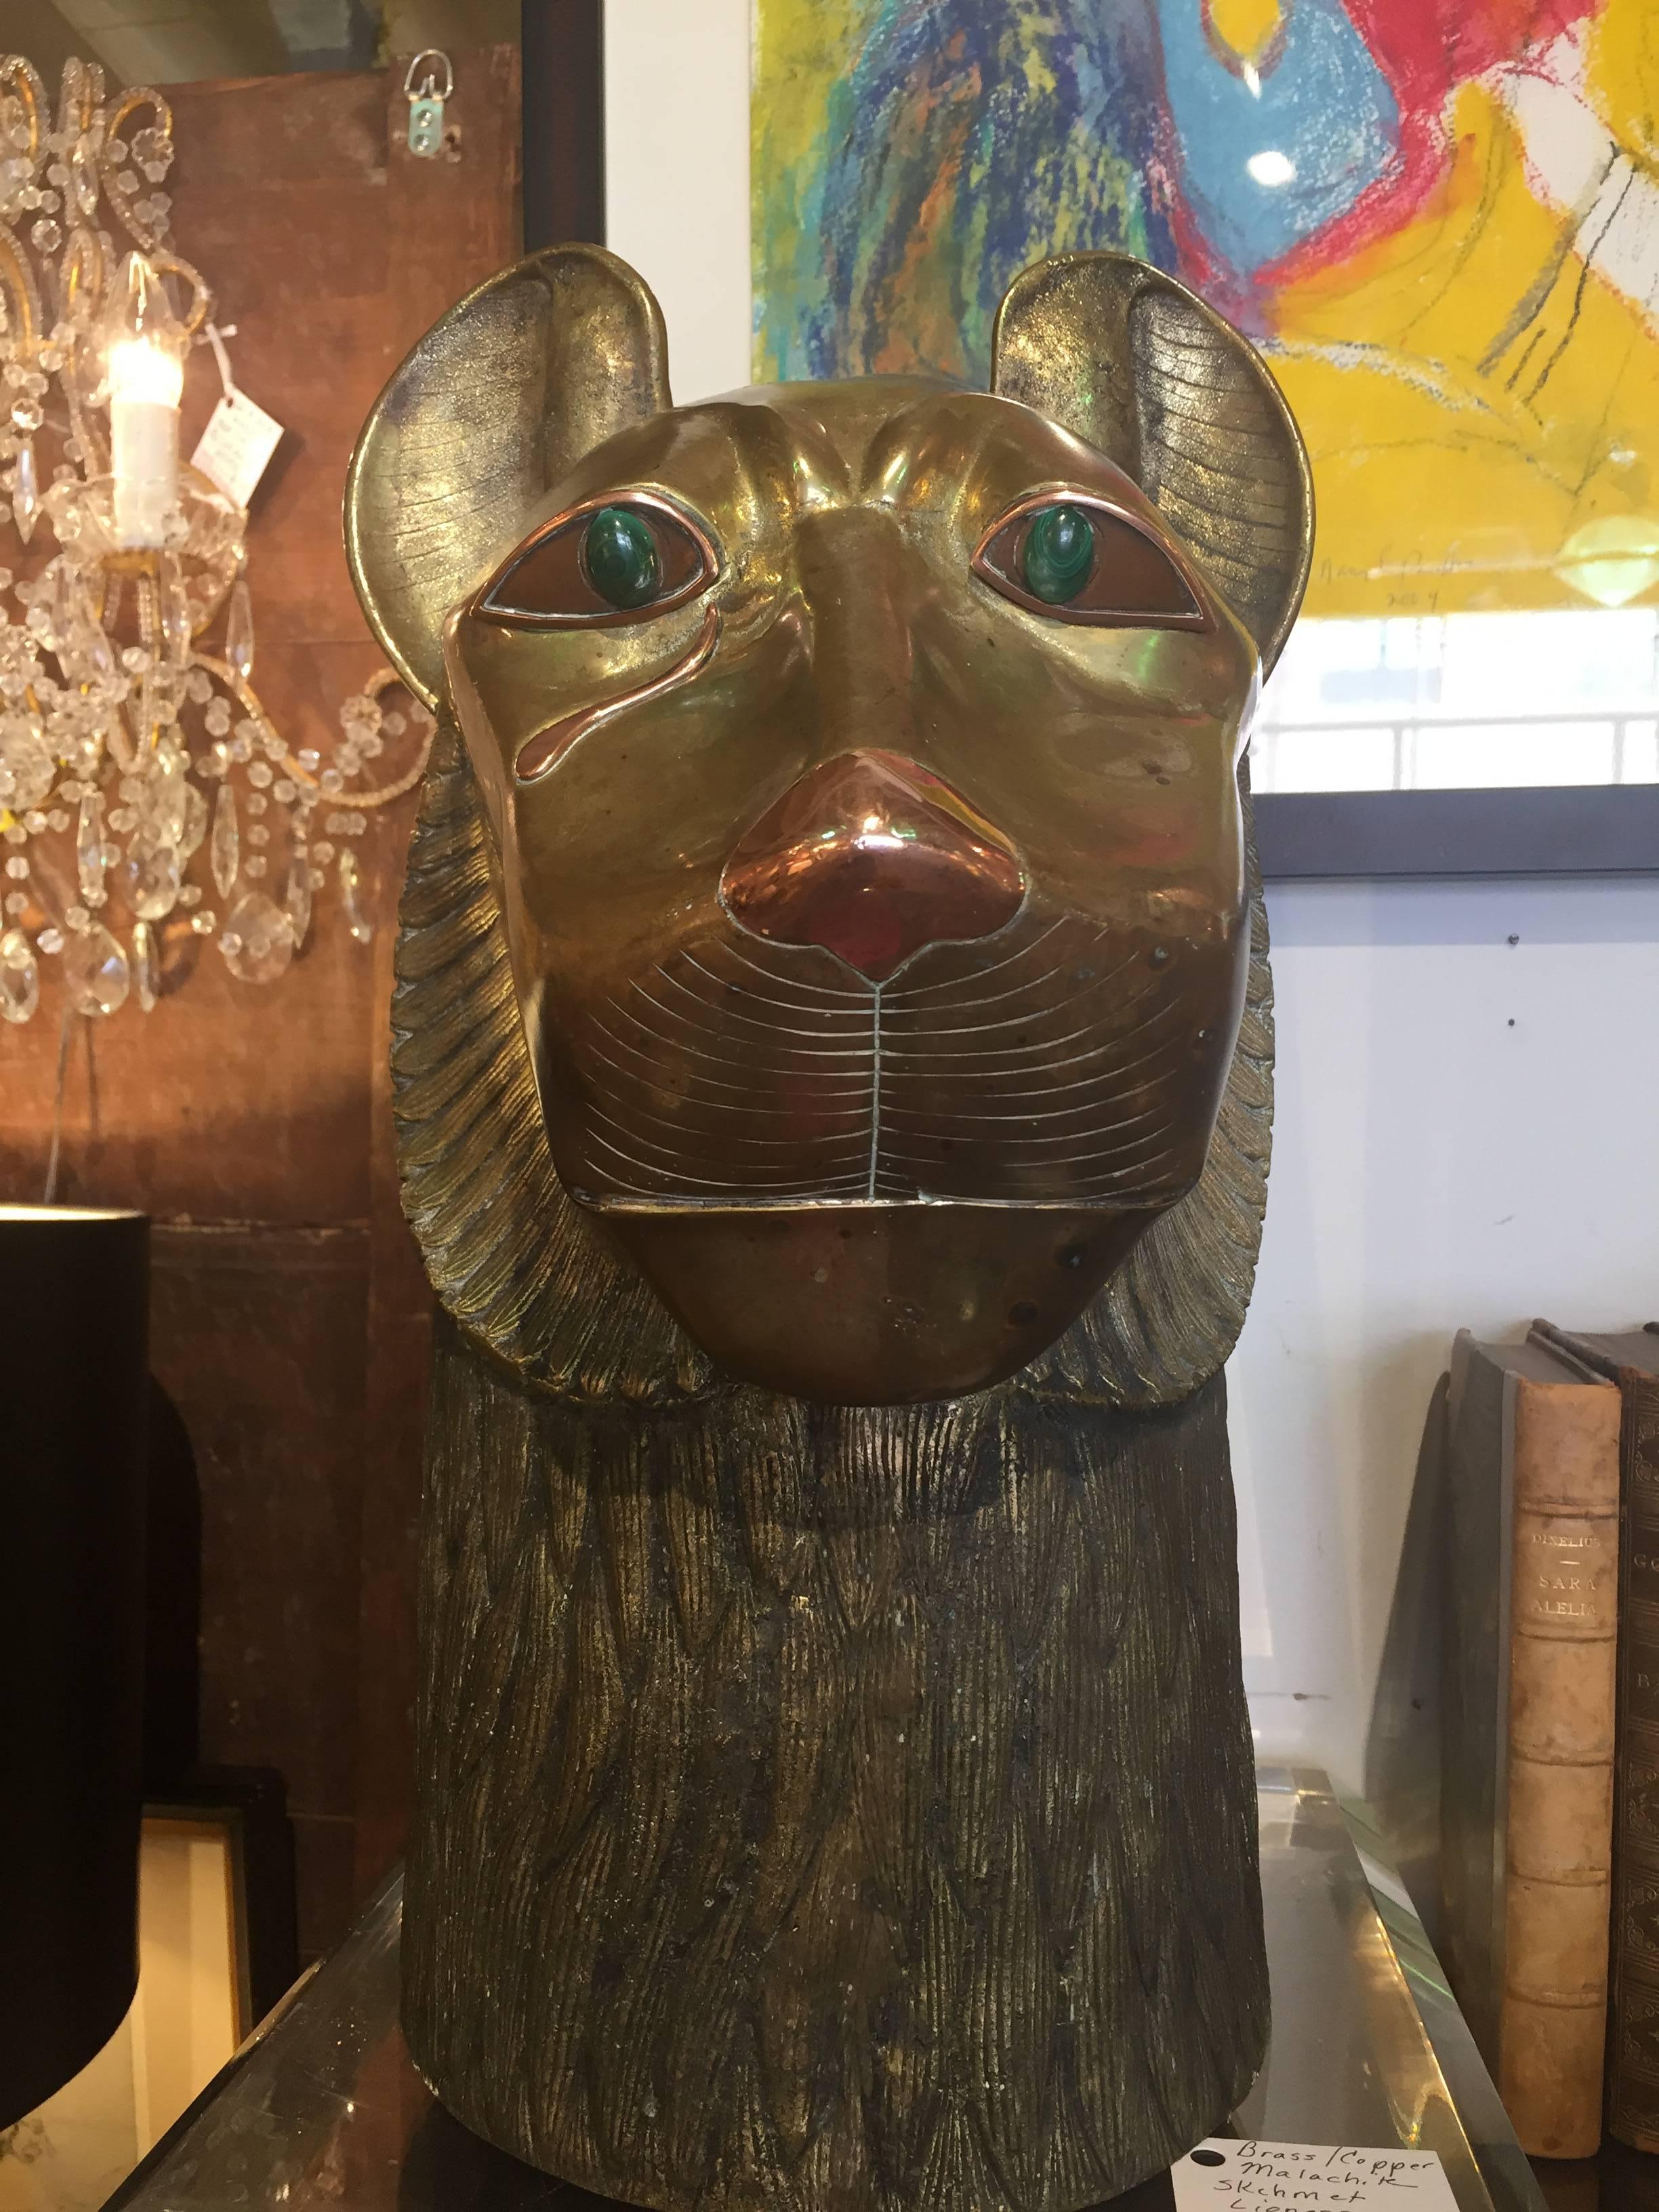 Brass finished metal sculpture of the Egyptian goddess Sekhmet having malachite eyes retailed by famed Interior Designer Richard Himmel in the 1970s.Attributed to Maitland-Smith. Not attached to Lucite base but will include it in the sale of the